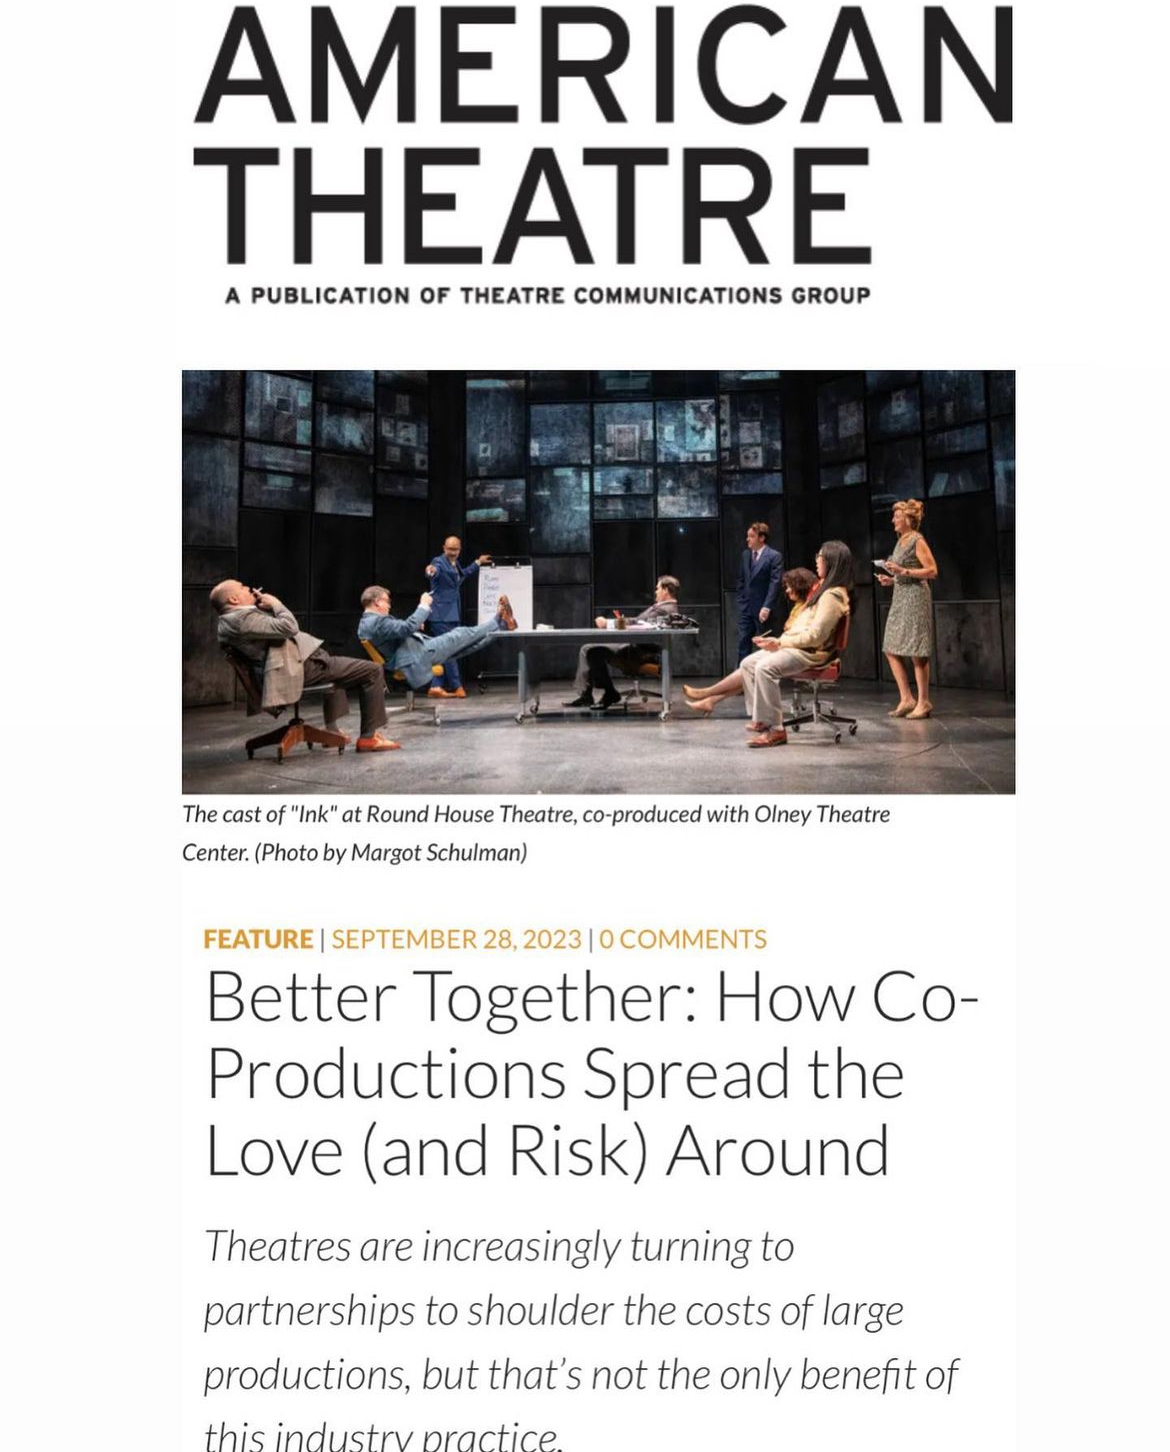 Featured in American Theatre Magazine: How Co-Productions Spread the Love (and Risk) Around